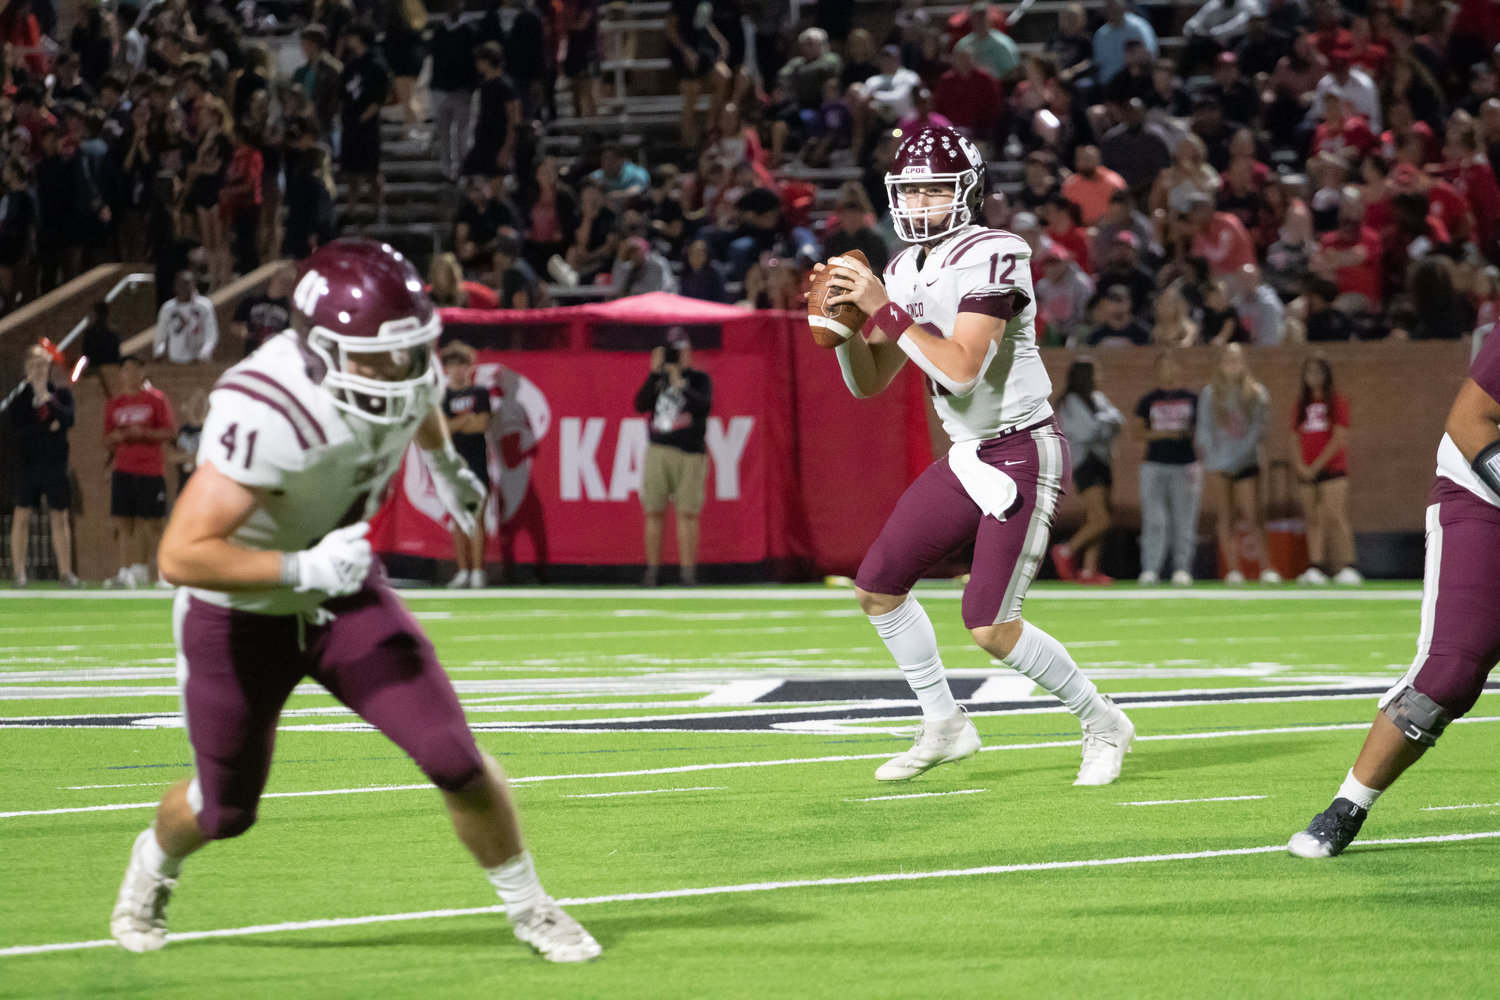 Cinco Ranch's Gavin Rutherford looks to pass during Friday's game between Katy and Cinco Ranch at Rhodes Stadium.